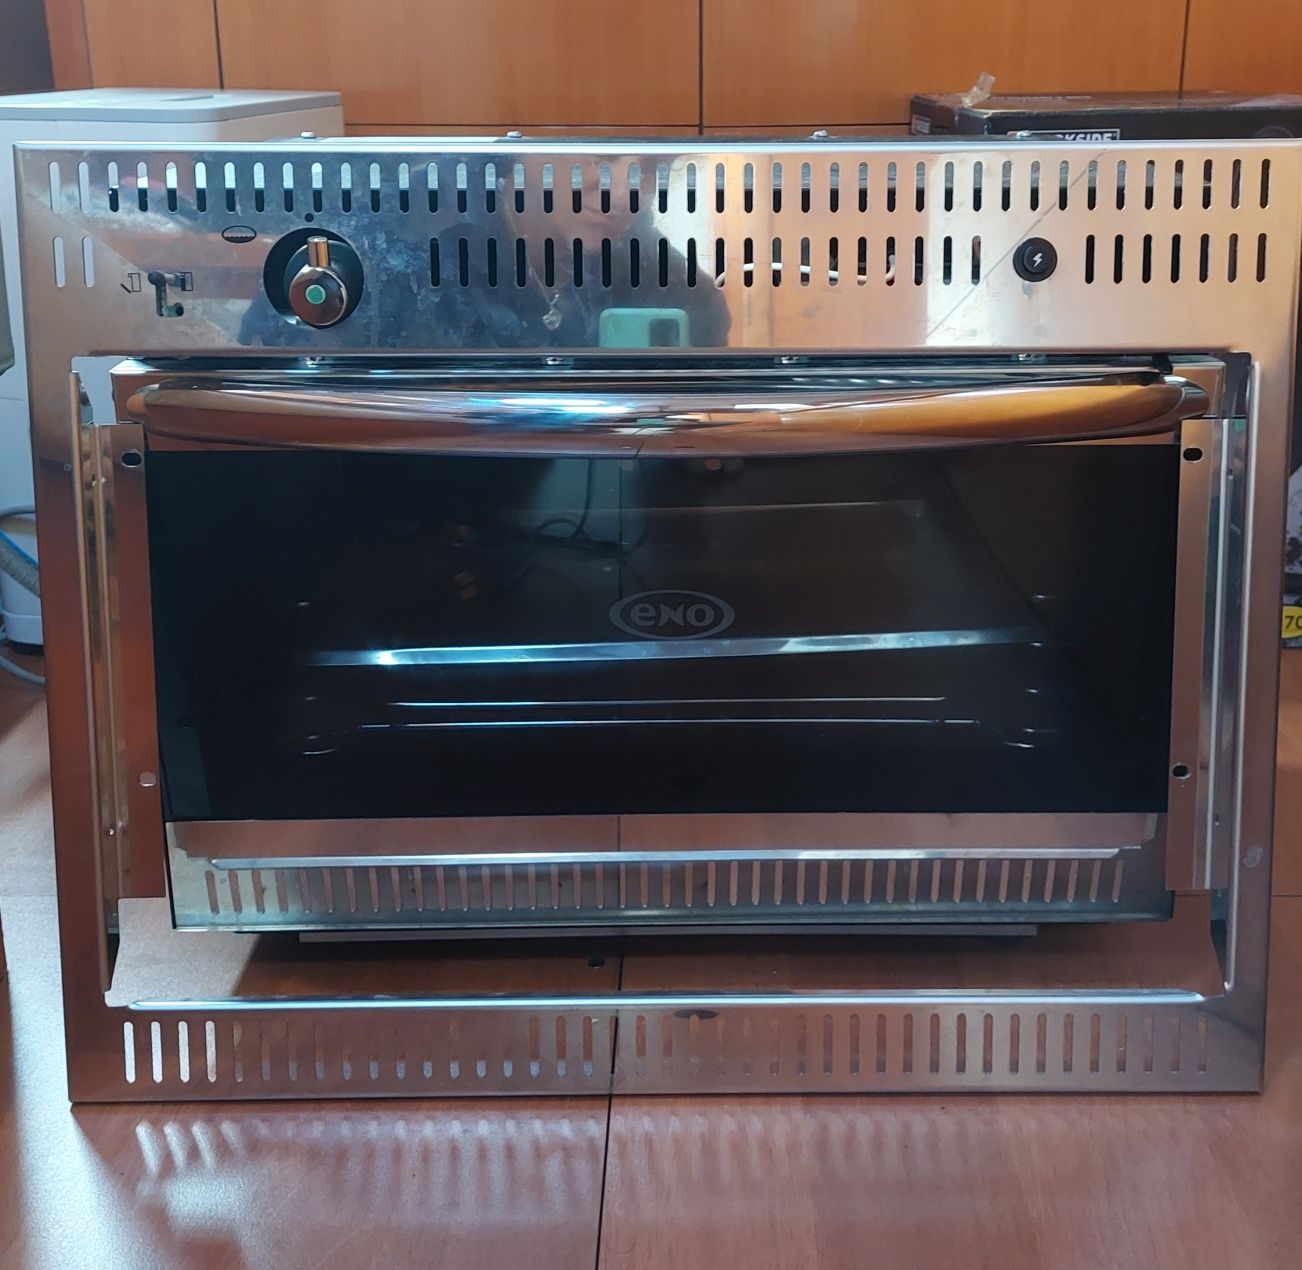 ENO Gas oven- NEW!!!